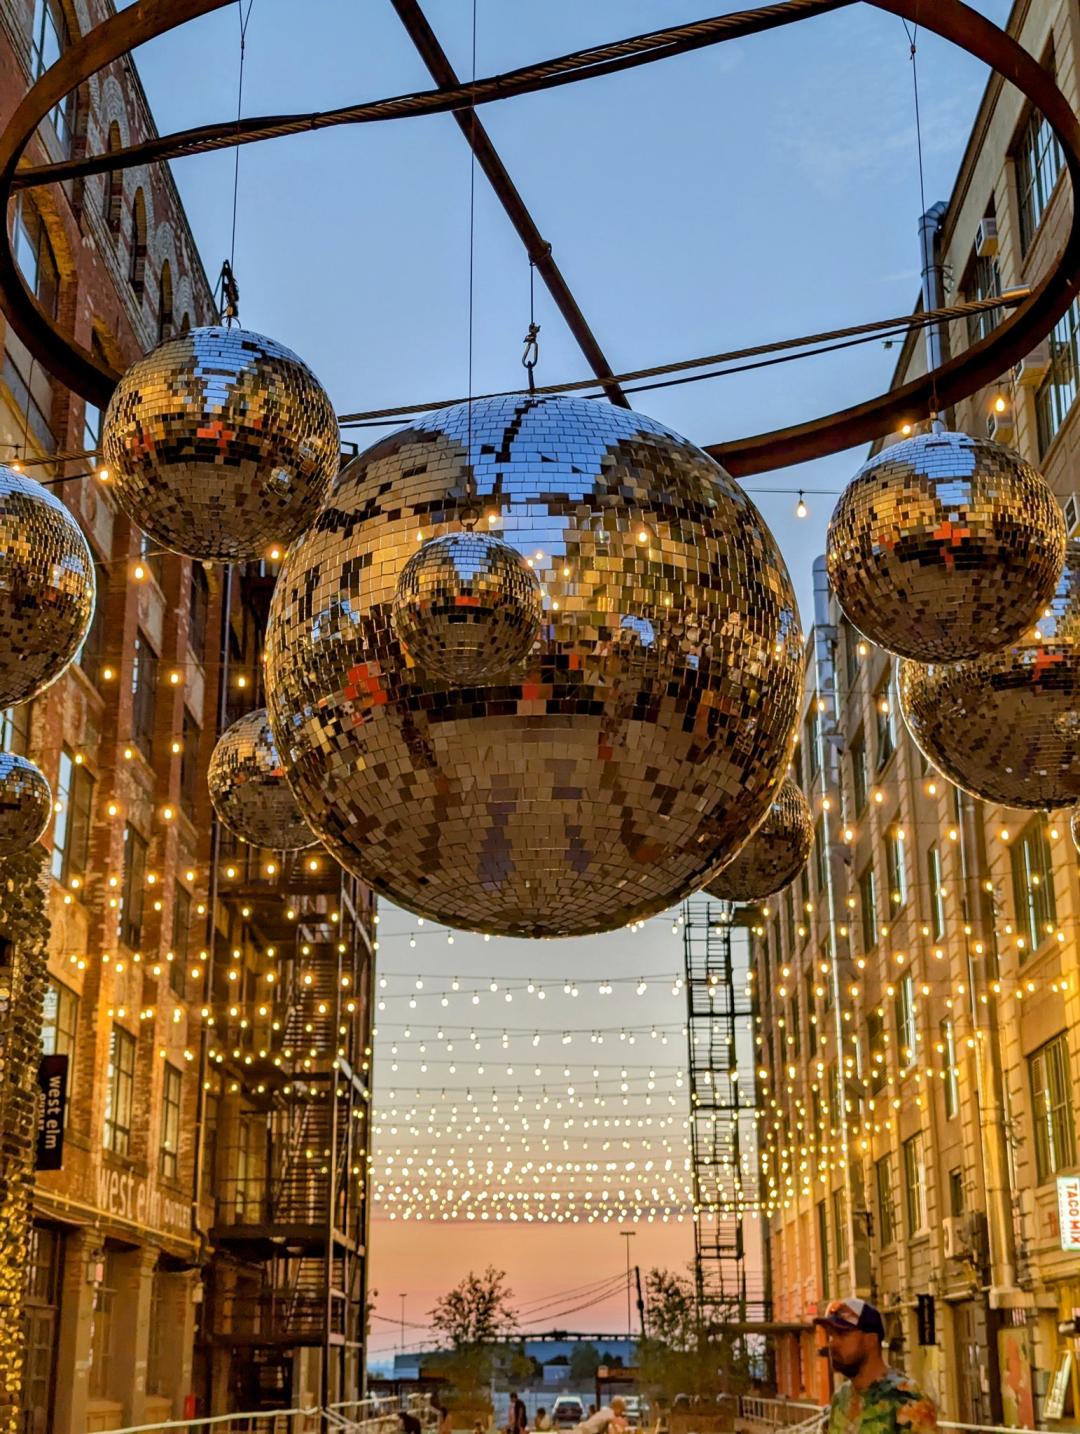 A photo of large outdoor disco balls at sunset taken in Brooklyn